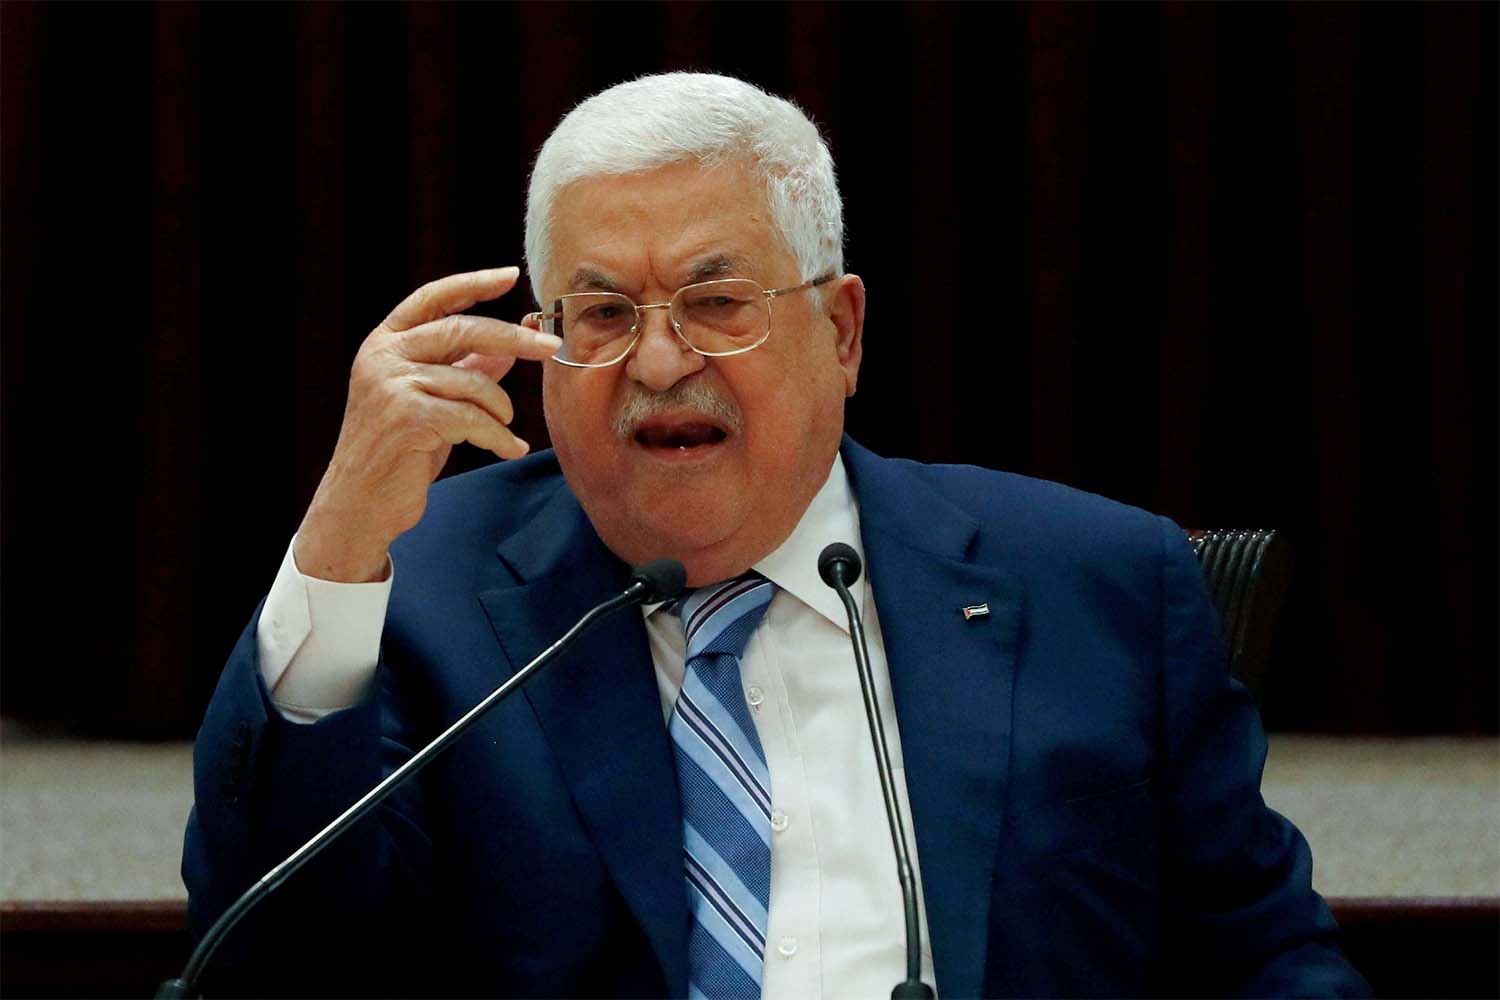 Abbas has been in power since 2005 and has ruled by decree for over a decade